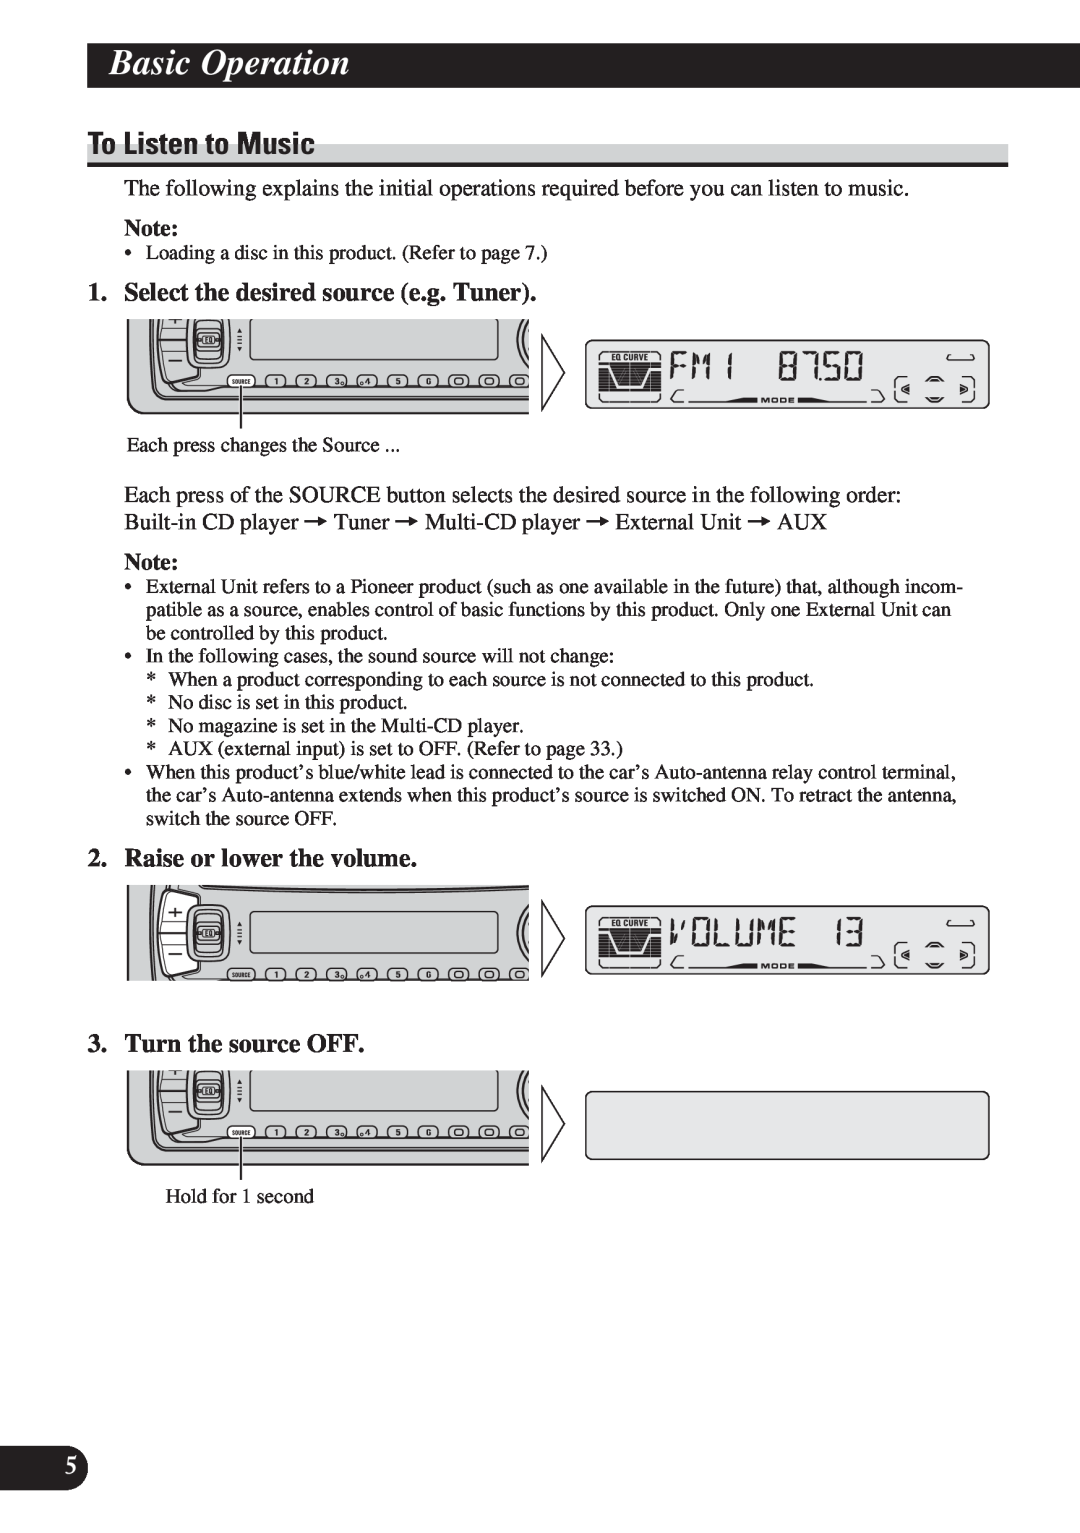 Pioneer DEH-P3150 operation manual Basic Operation, To Listen to Music, Select the desired source e.g. Tuner 